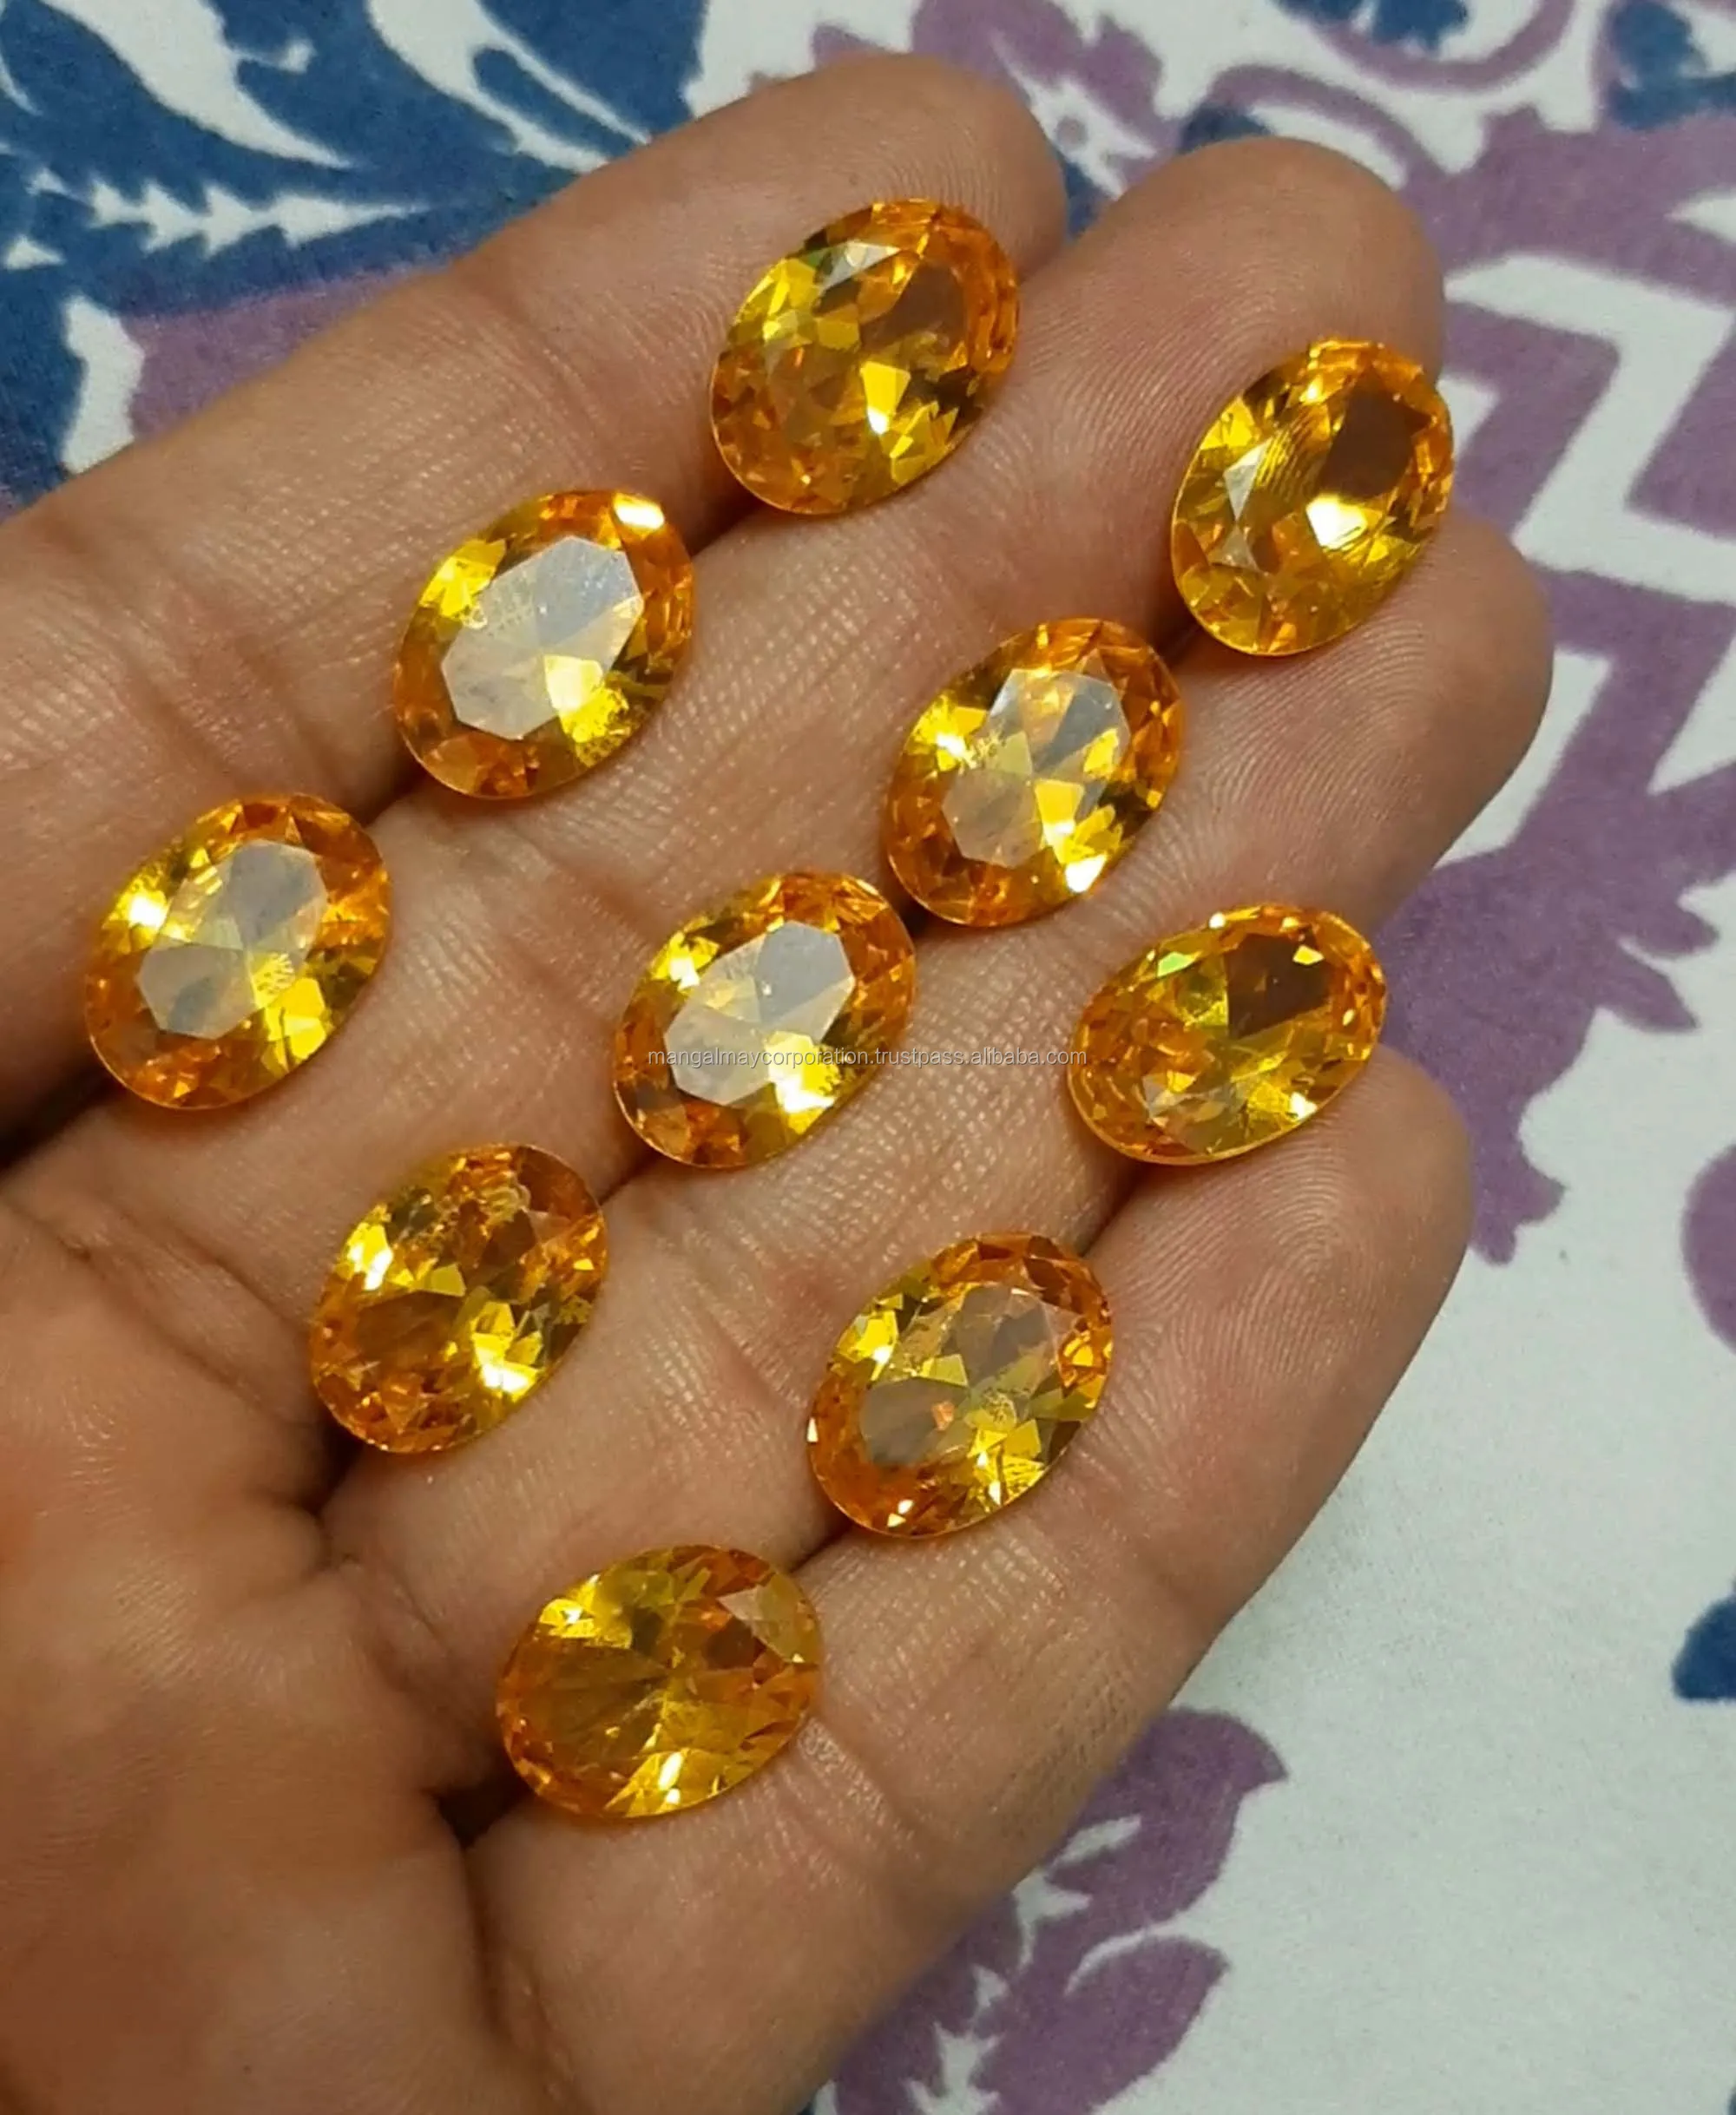 Wholesale Price 7x9 MM Oval Shape Genuine Citrine Gemstone Calibrated Cabochon Faceted Cut Citrine Yellow Gems